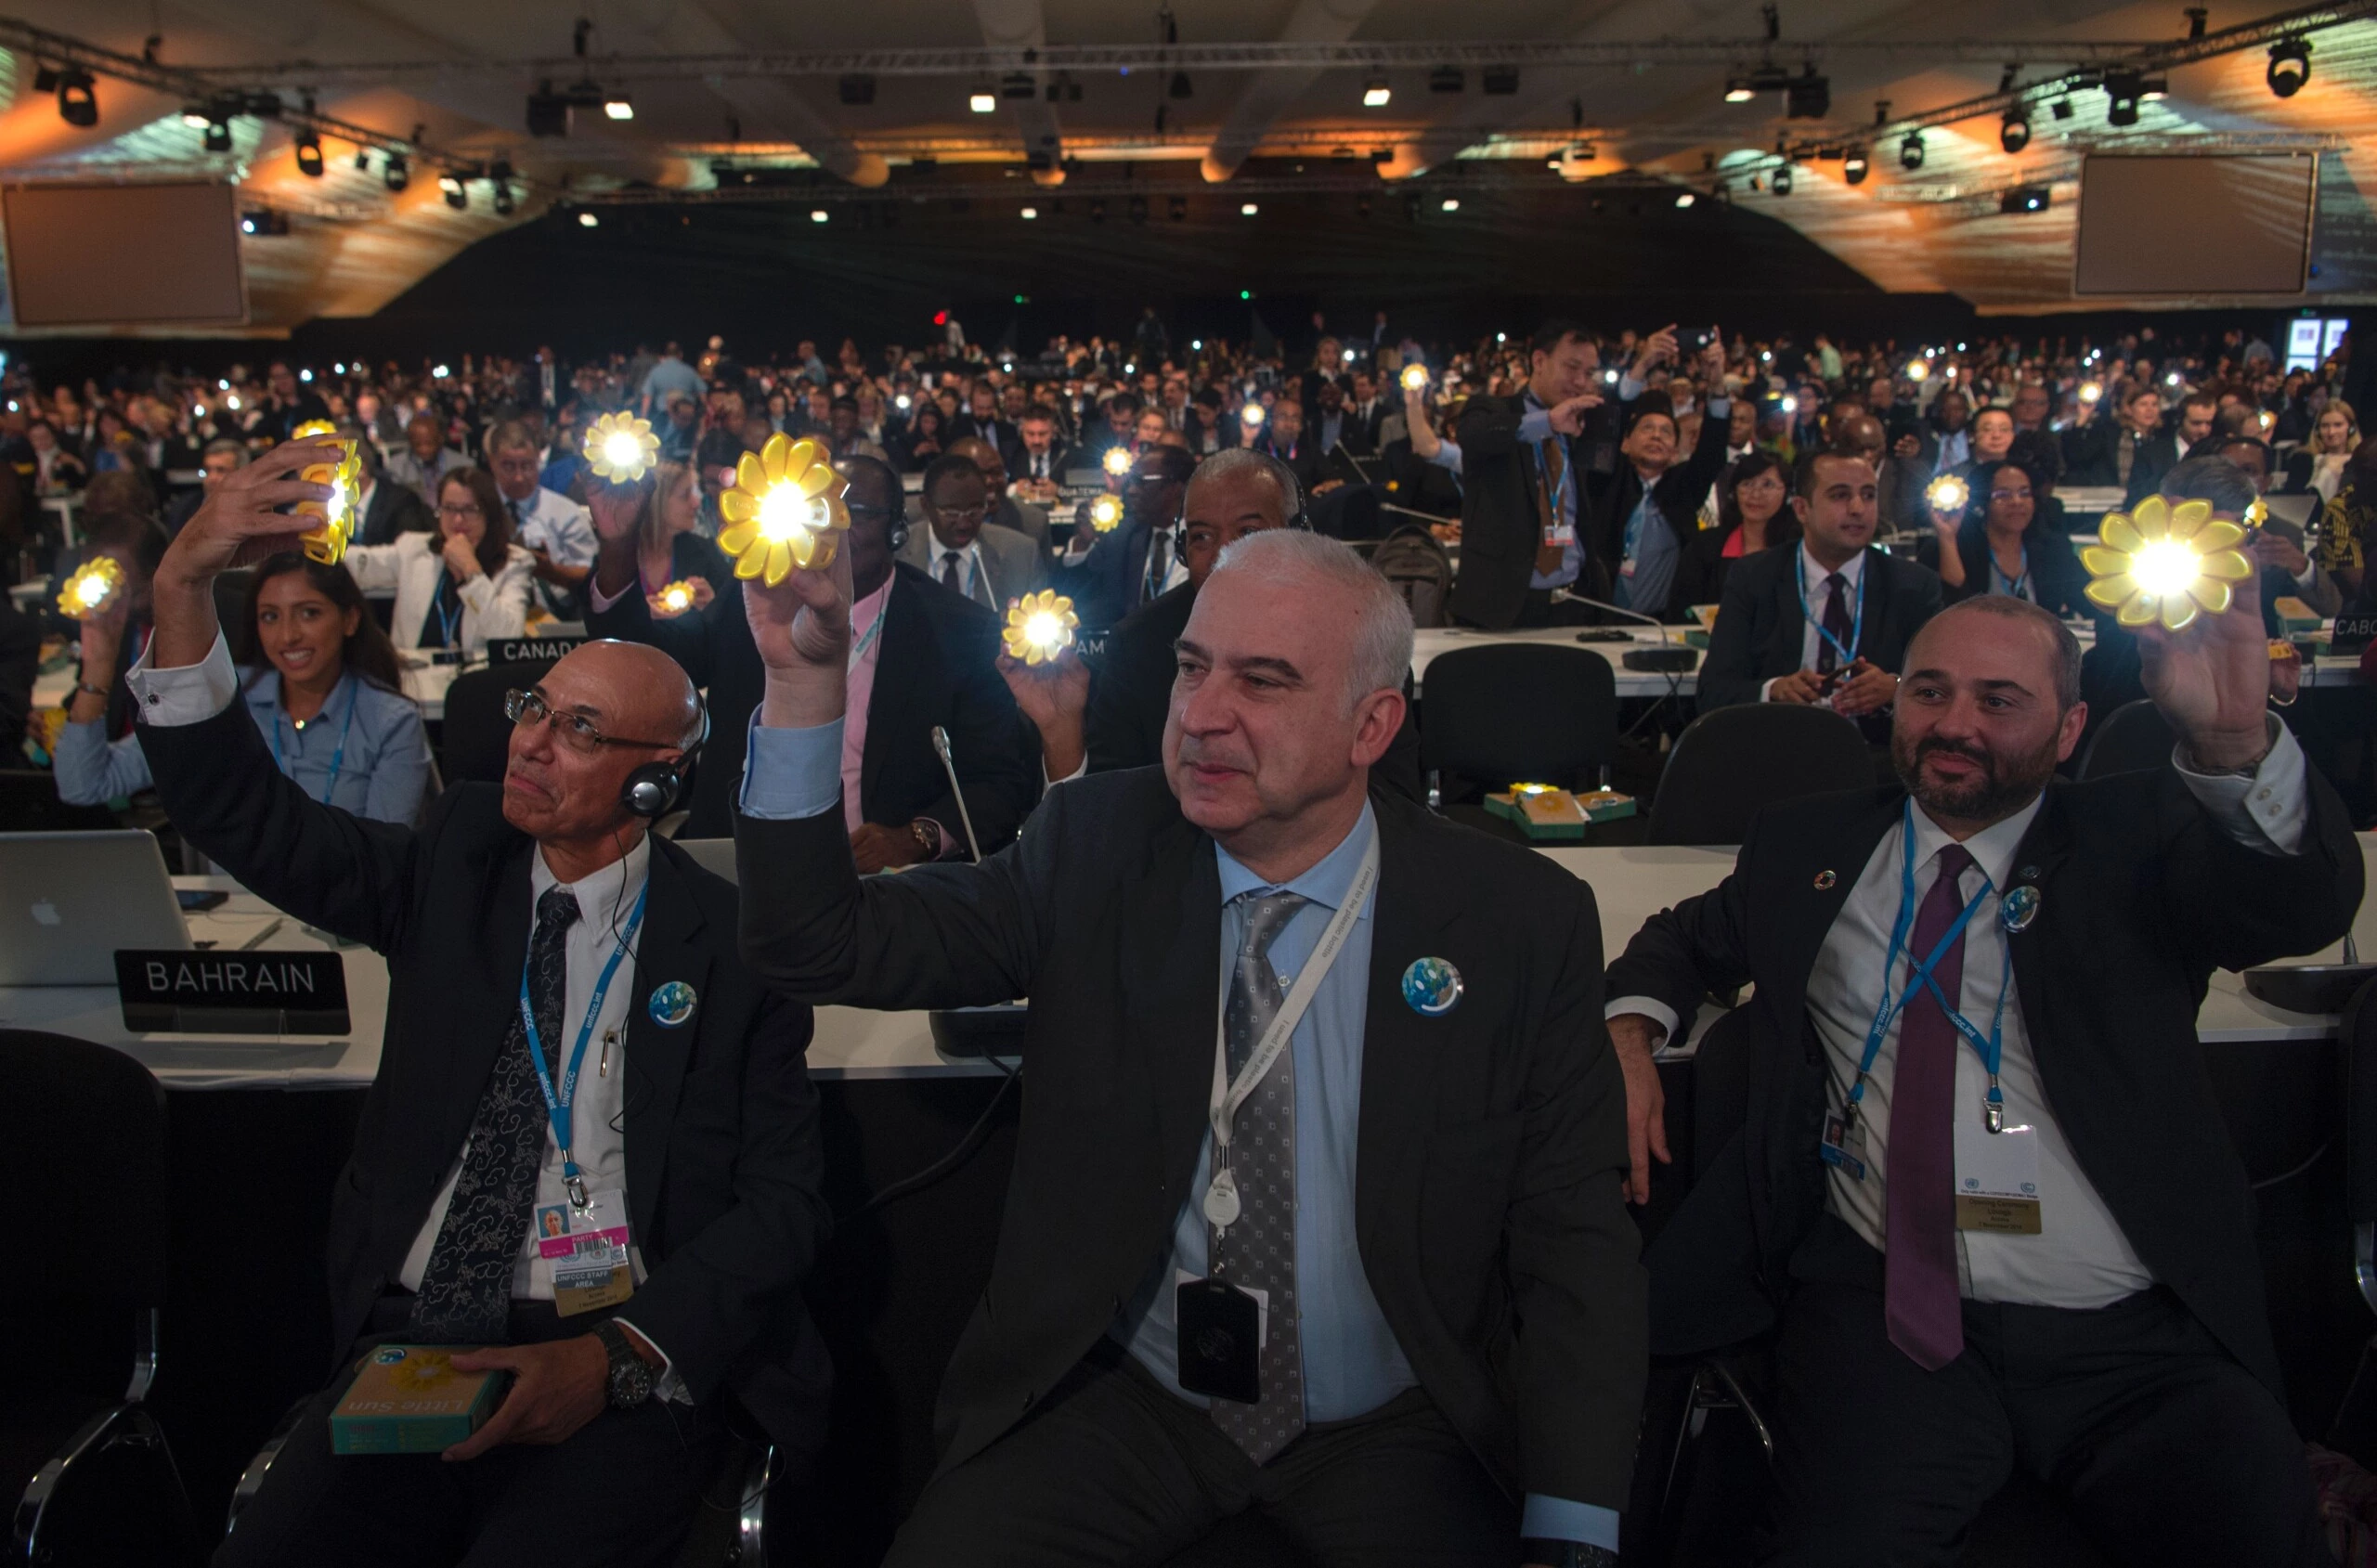 Delegates attend the opening session of the COP22 climate talks in Marrakesh on November 7, 2016.<br /><br /><br /><br /><br /><br /><br /><br /><br /><br /><br /><br /><br /><br /><br /><br /><br /><br /><br /><br /> UN talks to implement the landmark Paris climate pact opened in Marrakesh, buoyed by gathering momentum but threatened by the spectre of climate change denier Donald Trump in the White House. / AFP / FADEL SENNA        (Photo credit should read FADEL SENNA/AFP/Getty Images)